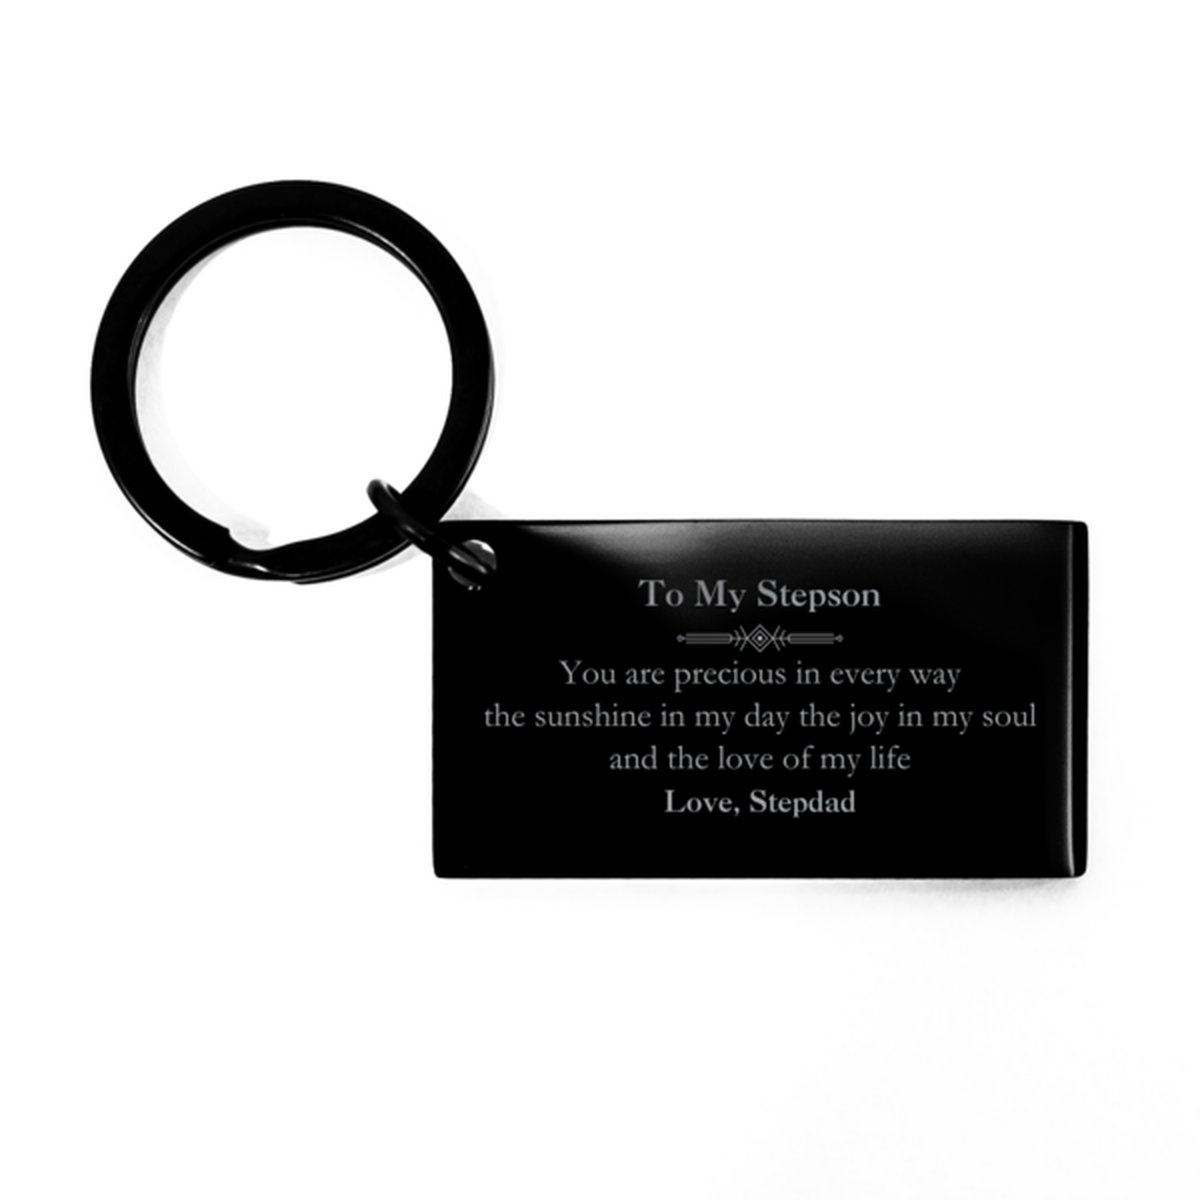 Graduation Gifts for Stepson Keychain Present from Stepdad, Christmas Stepson Birthday Gifts Stepson You are precious in every way the sunshine in my day. Love, Stepdad